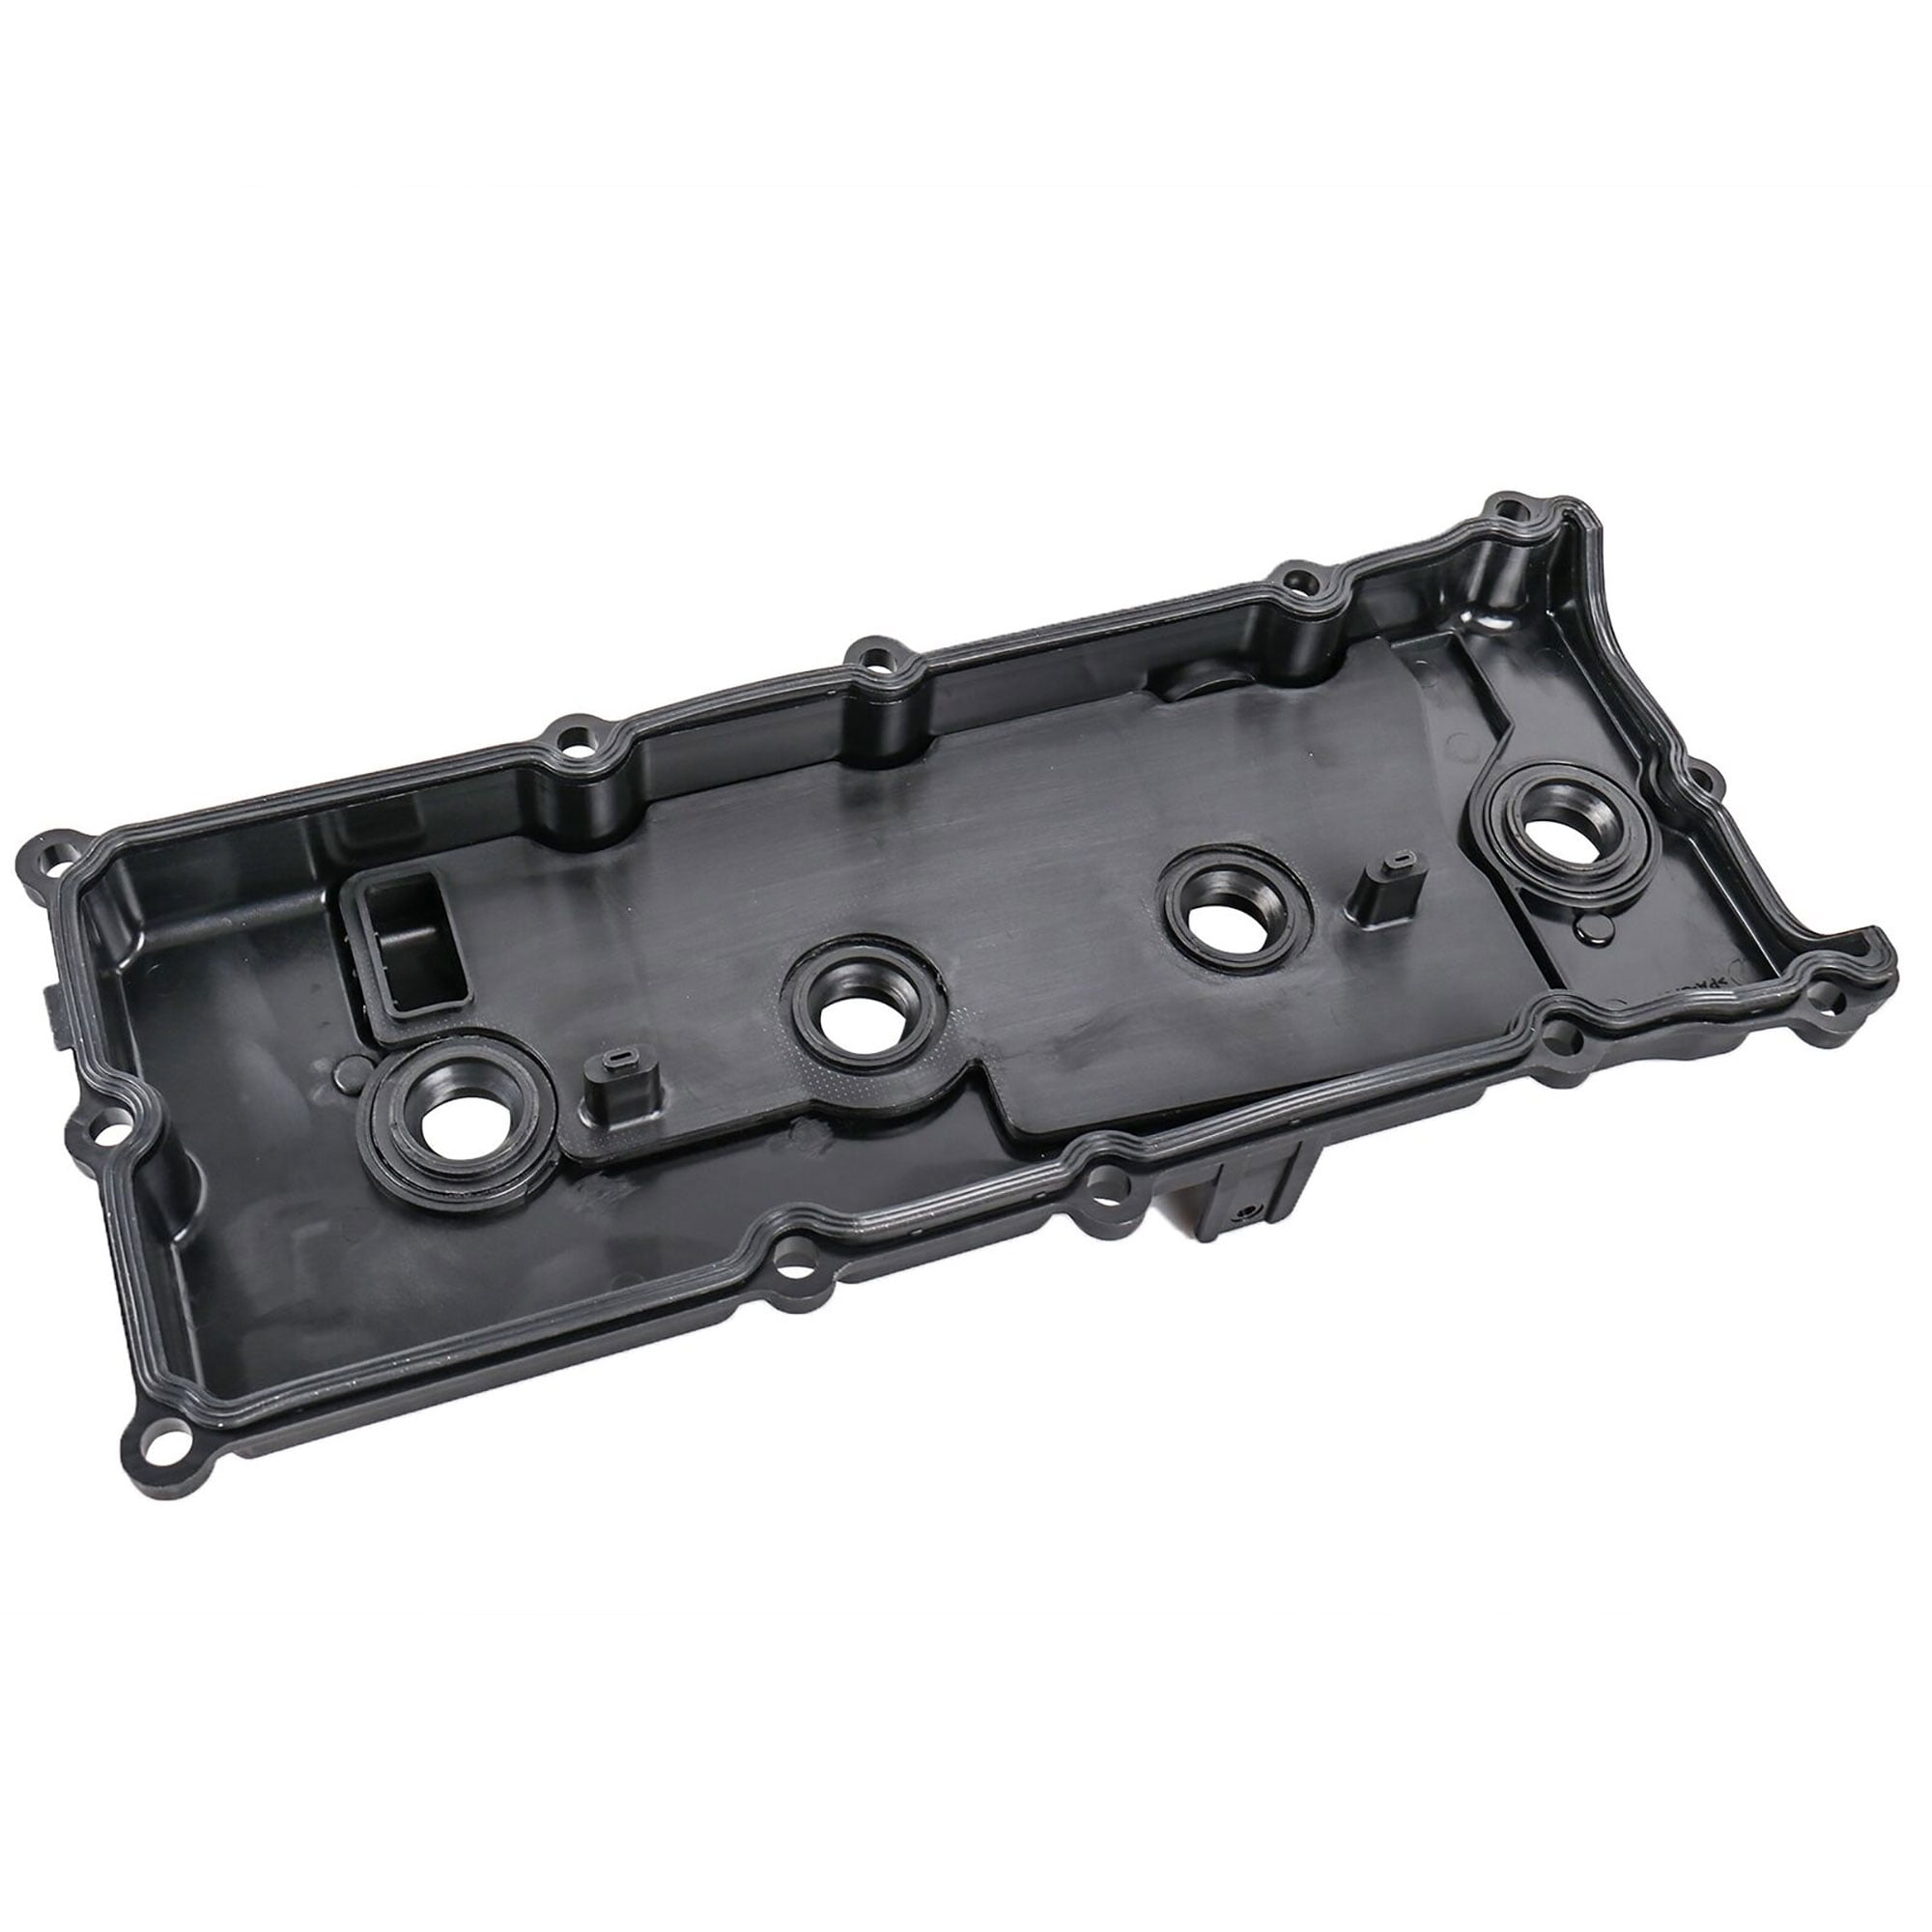 Valve Cover with Gasket for Right Passenger Side RH and Left Driver Side LH For 2007-2015 Nissan Armada Titan For 2012-2016 Nissan NV2500 NV3500 For - 1